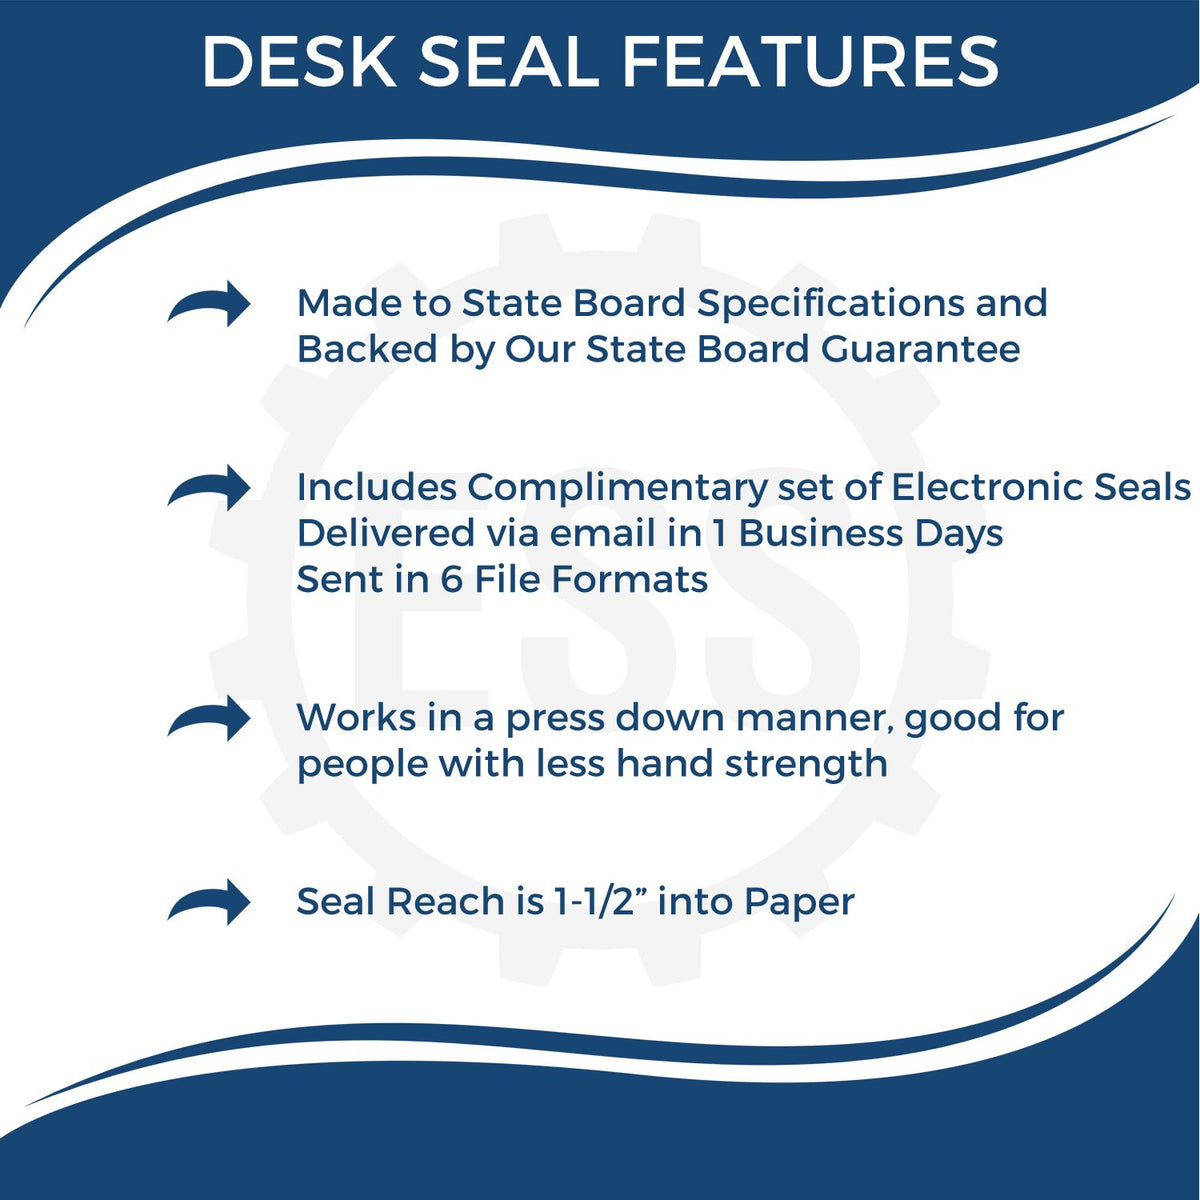 A picture of an infographic highlighting the selling points for the Nebraska Geologist Desk Seal